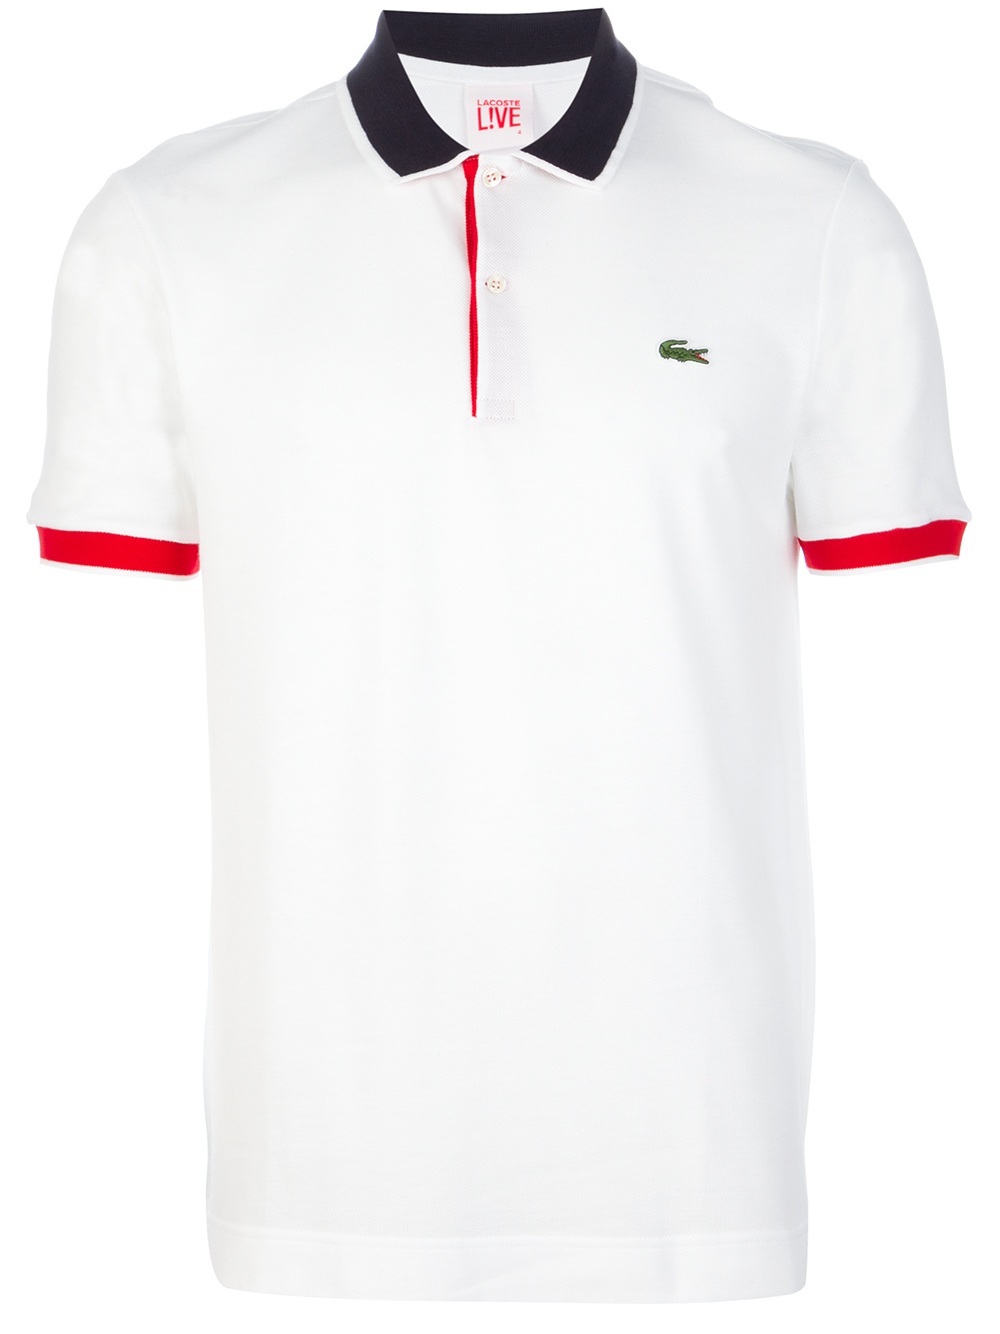 lacoste shirts at kohl's - 62% OFF 